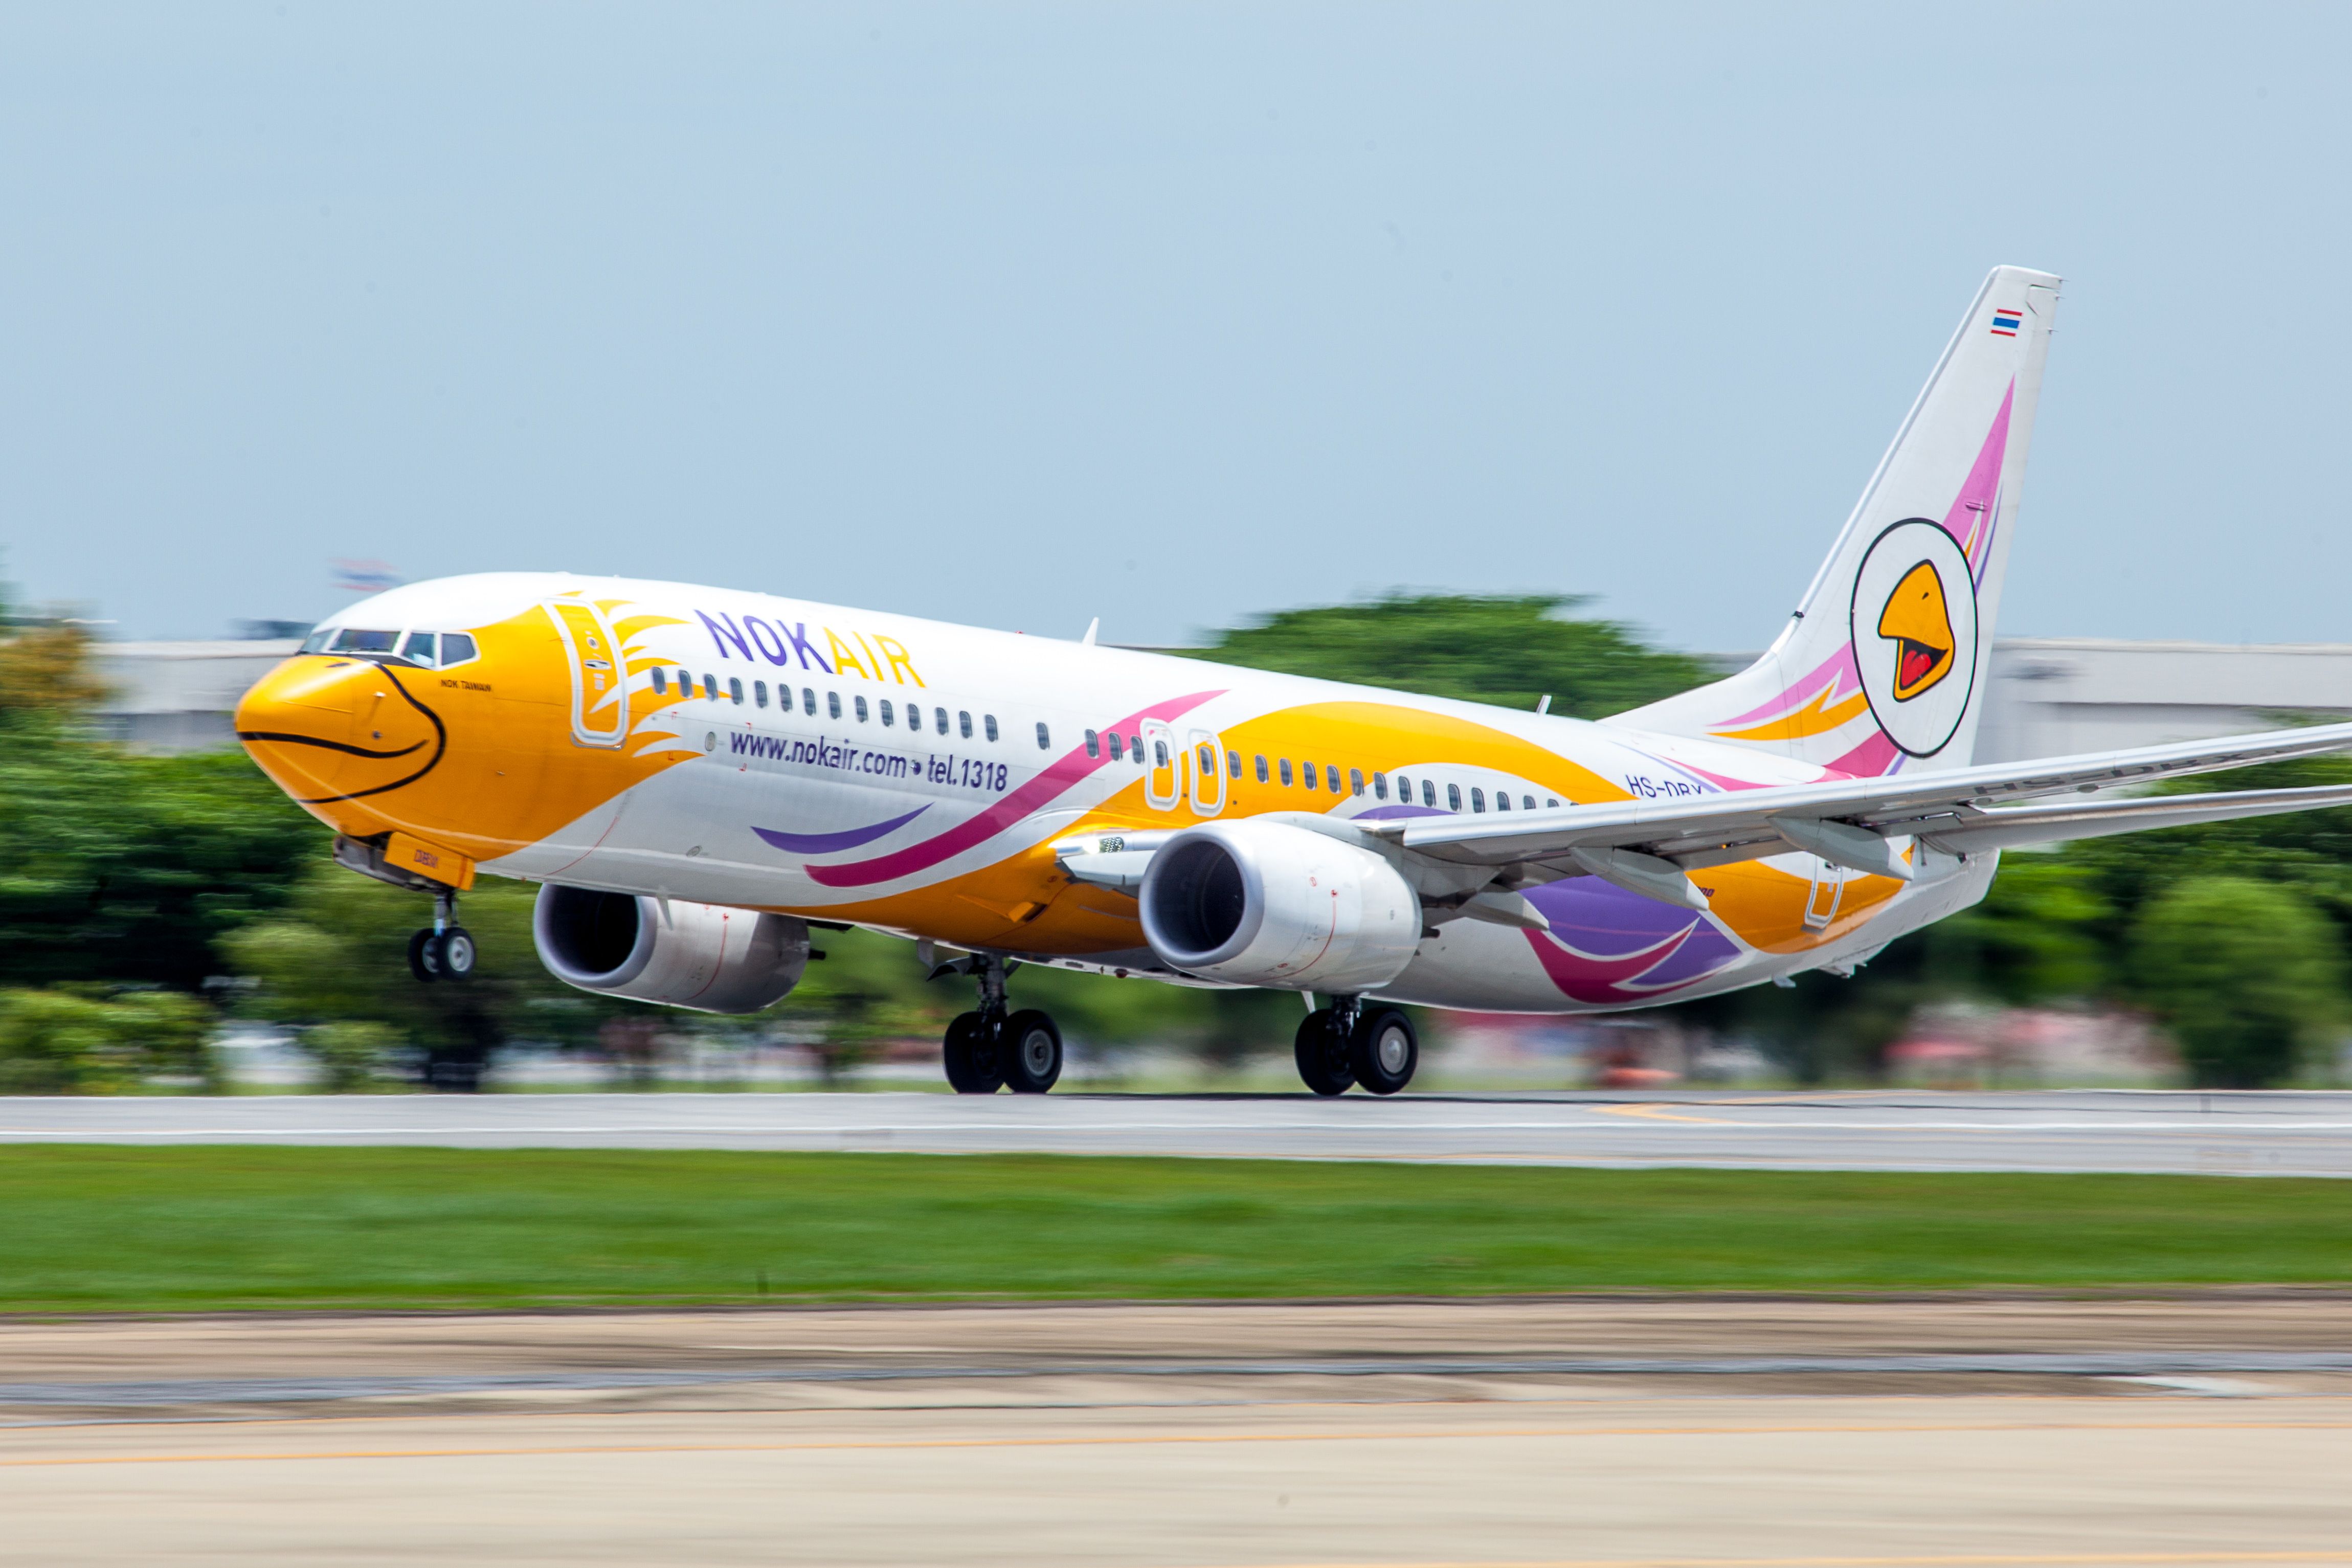 Nok Air Boeing 737-800 HS-DBX was taking off from Don Muang international airport on Bangkok